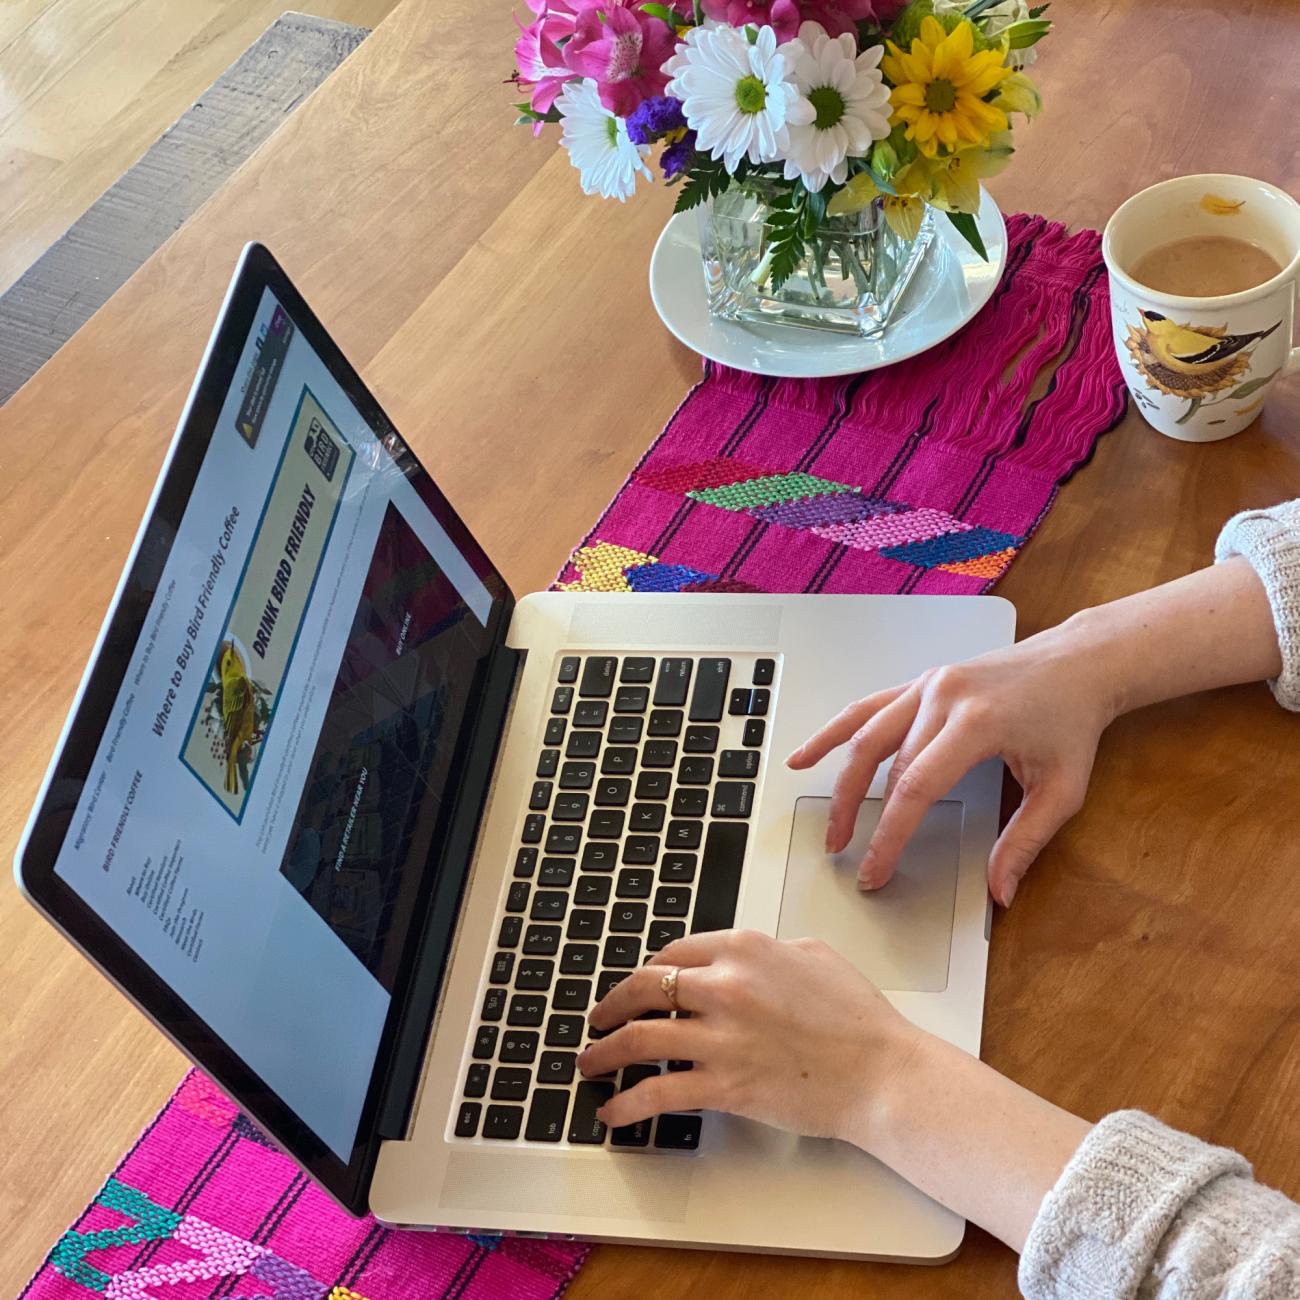 A photo of a person using a laptop. A mug of coffee and a flower base are also on the table.